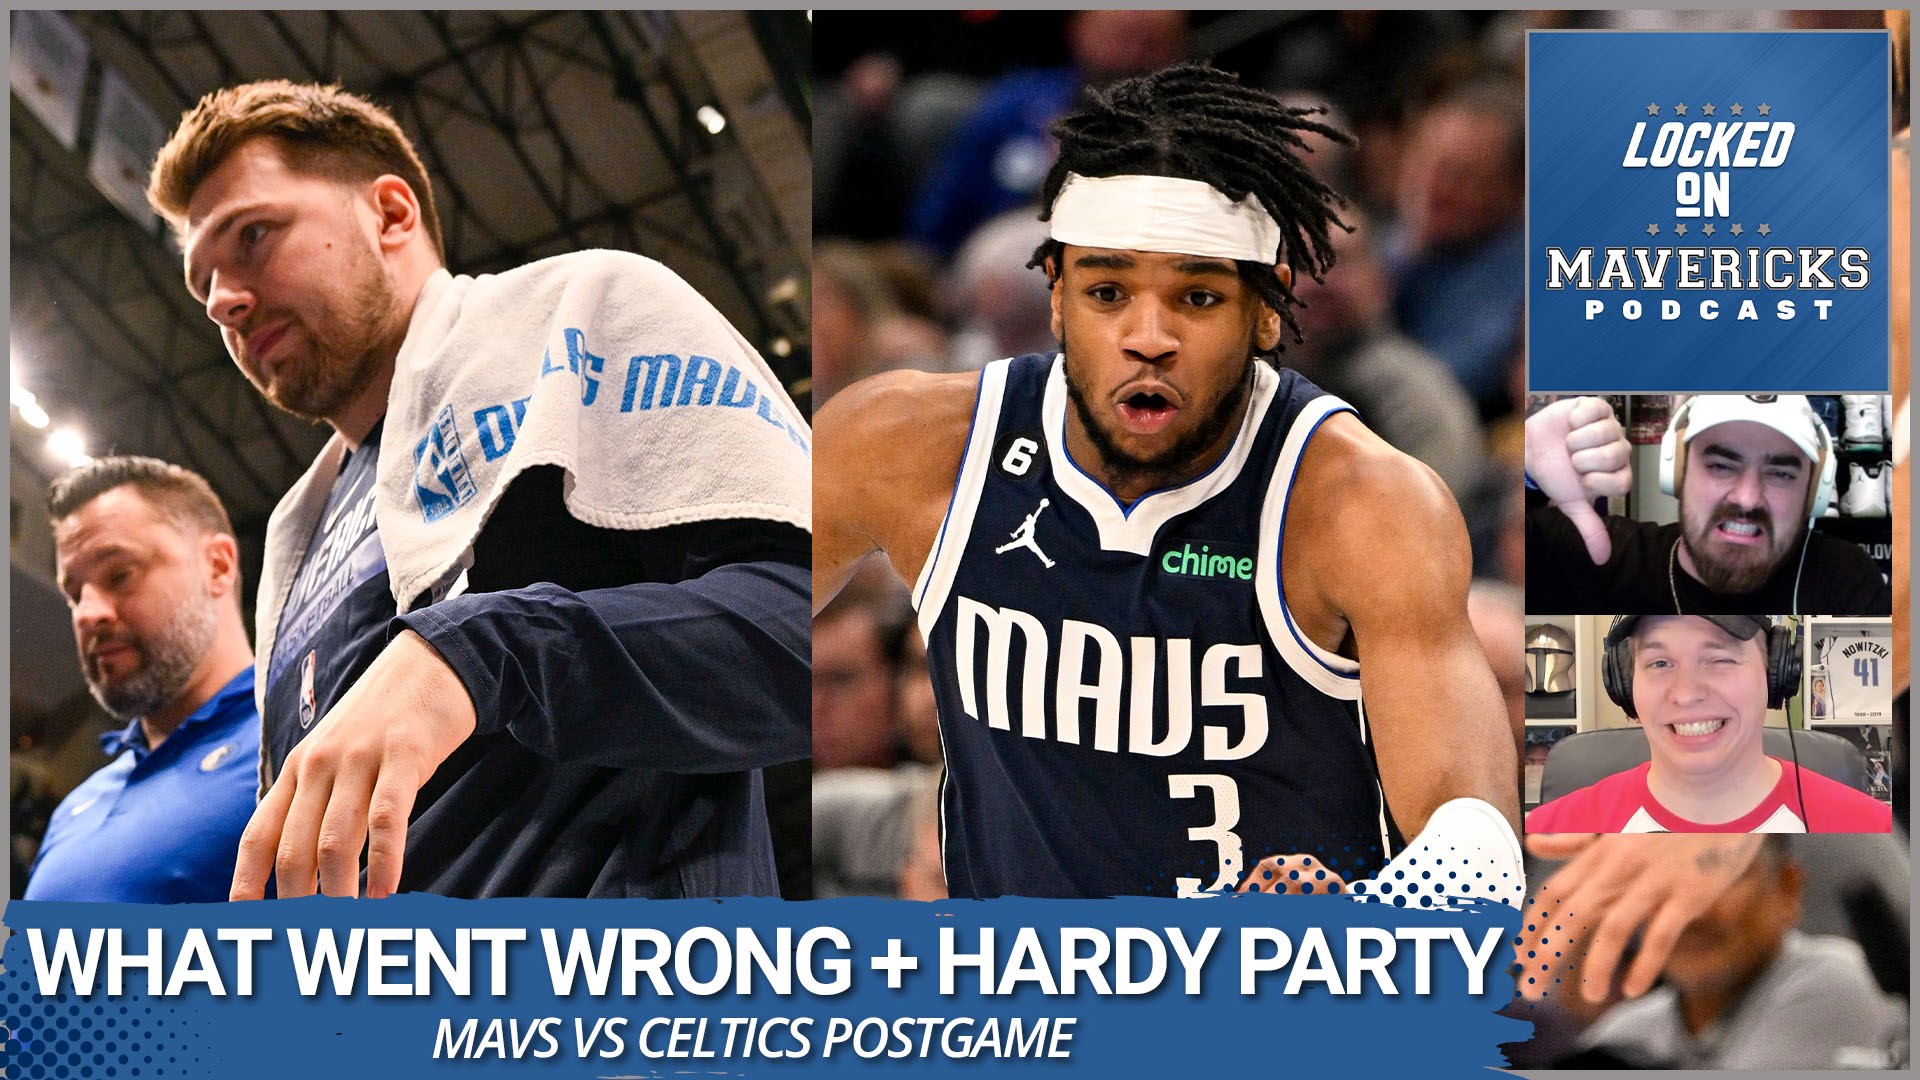 Nick Angstadt & Isaac Harris breakdown the Mavs' loss to the Celtics. What's the difference between these two teams?